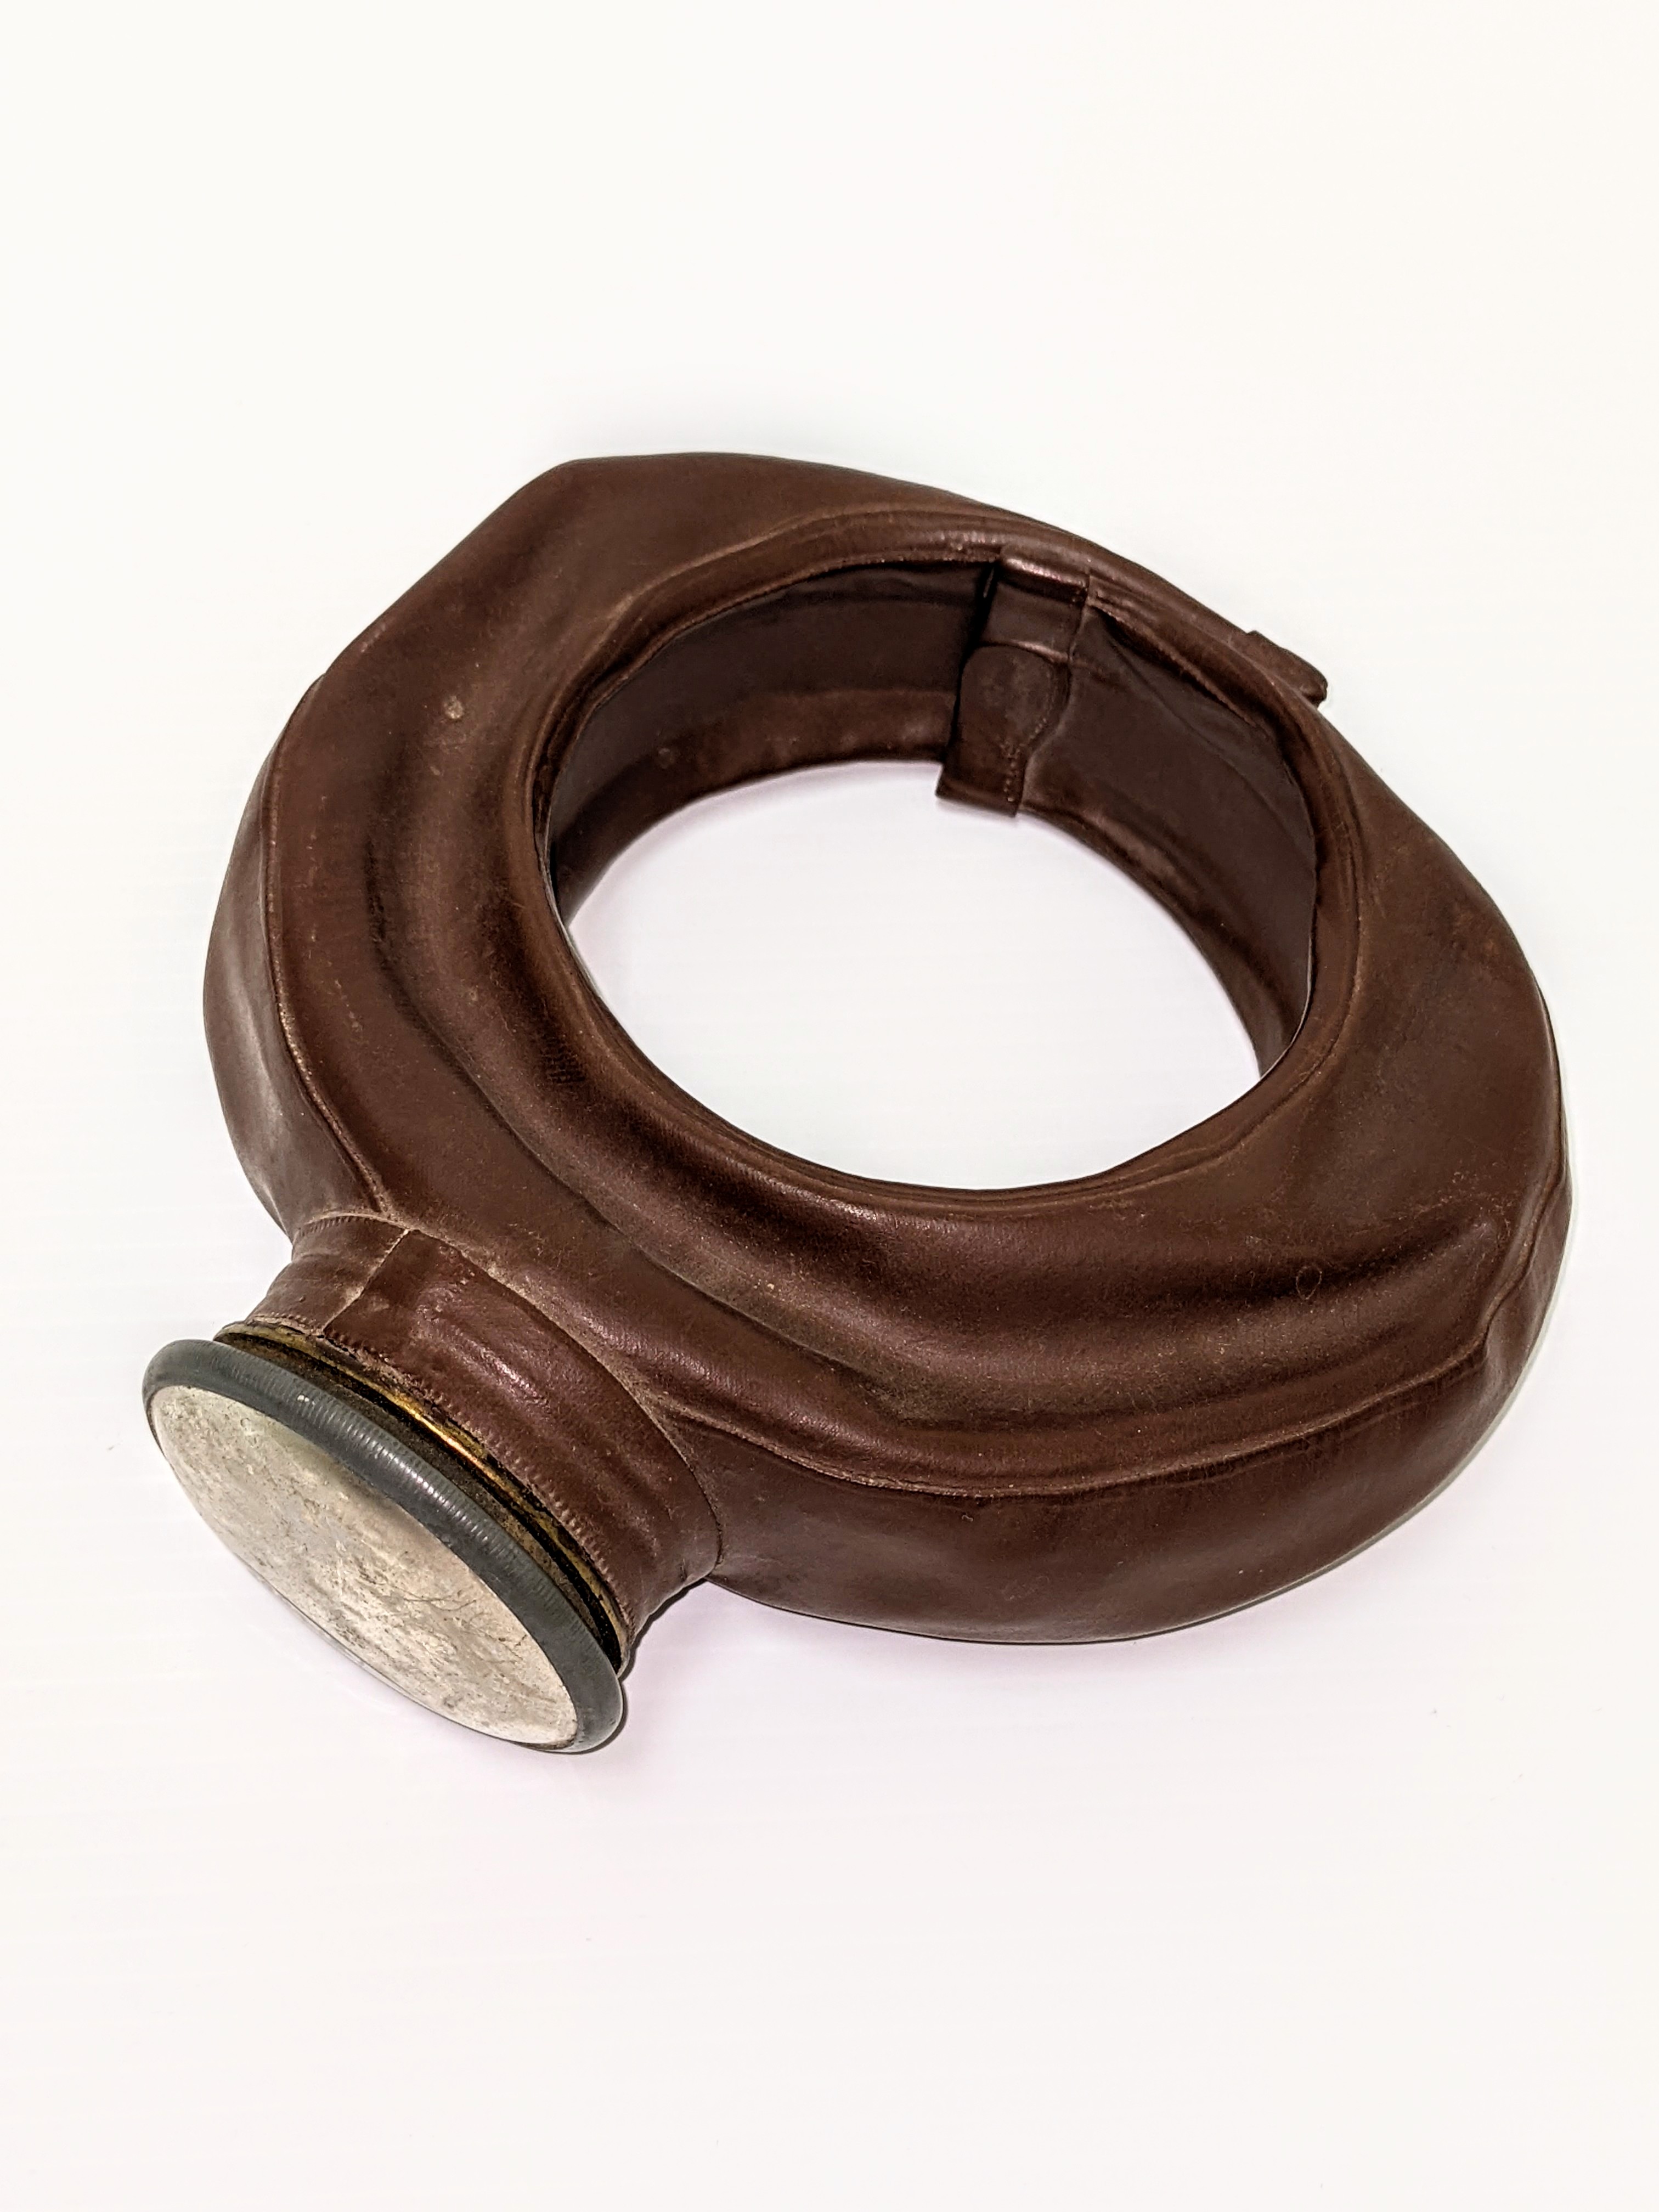 This strange looking bottle is called a "Tonsillectomy Bag". Manufactured by the Davol Rubber company of Rhode island in the 40's and 50's, this bag assisted in soothing a patients throat after having a tonsillectomy. The bag was filled with water then frozen / chilled so it could be wrapped around the patients neck - the cool temperature aiding in reducing swelling and pain. It is made of real rubber and has become very brittle - with the invention of pliable bags like ziplock, these unique devices were quickly phased out of medical practice.
02/05/2022
2004.18.01 / Simpson, Ena